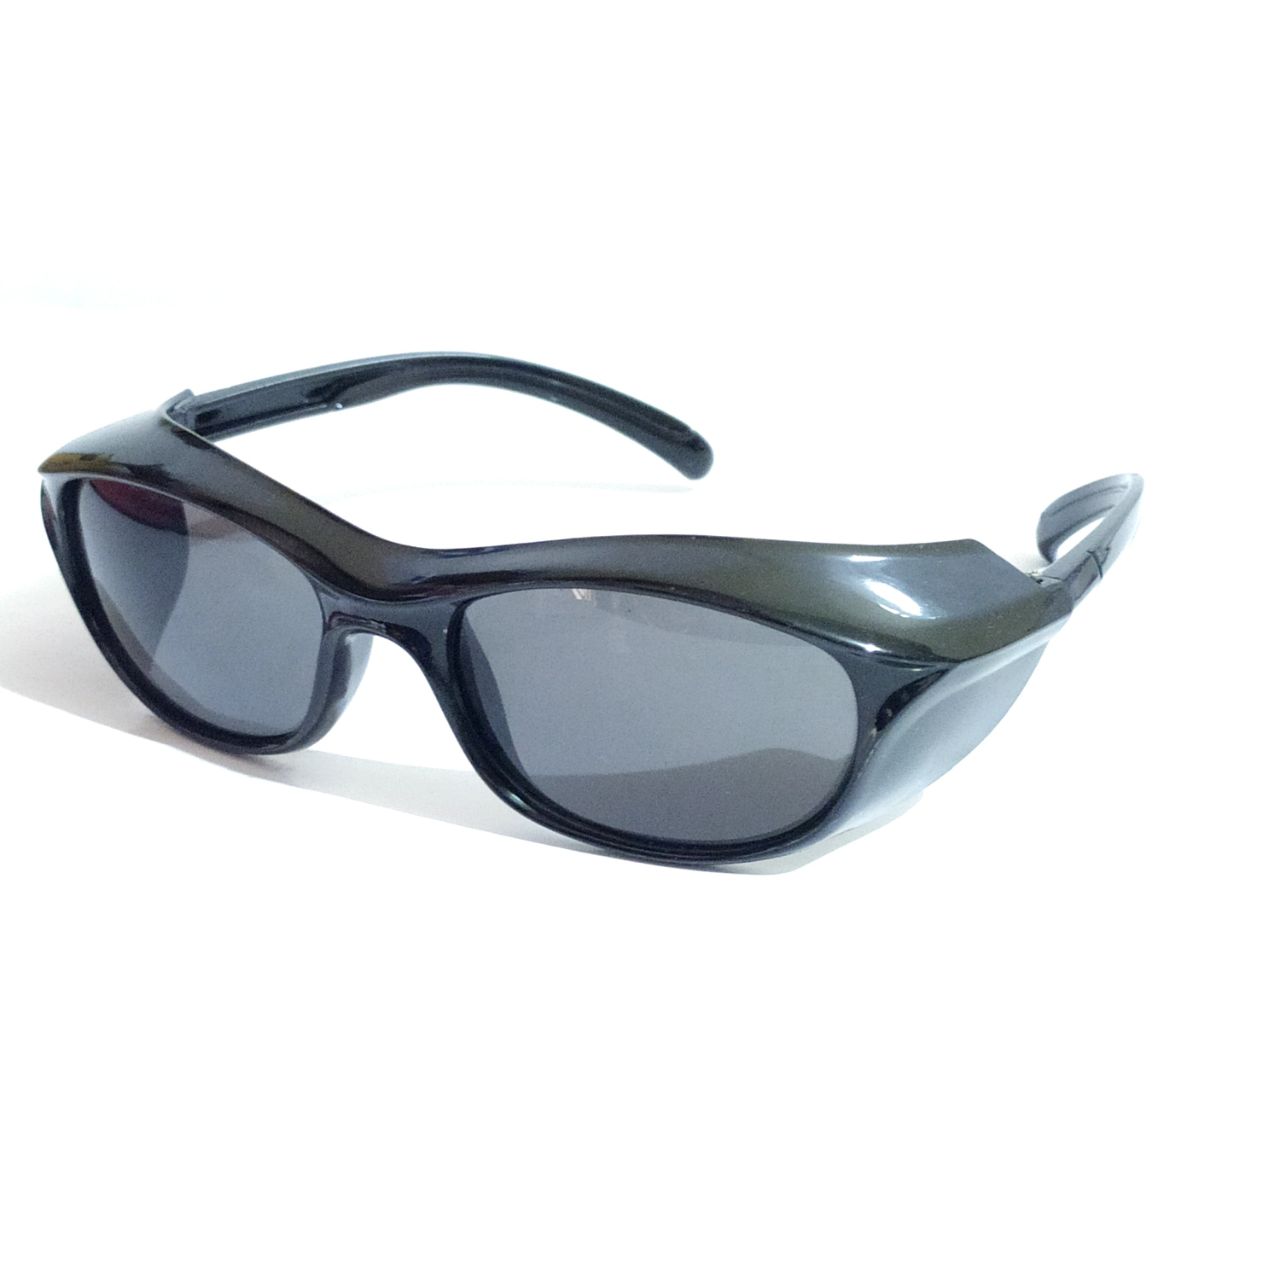 Black Goggles For Eye Surgery with Side Shield 140